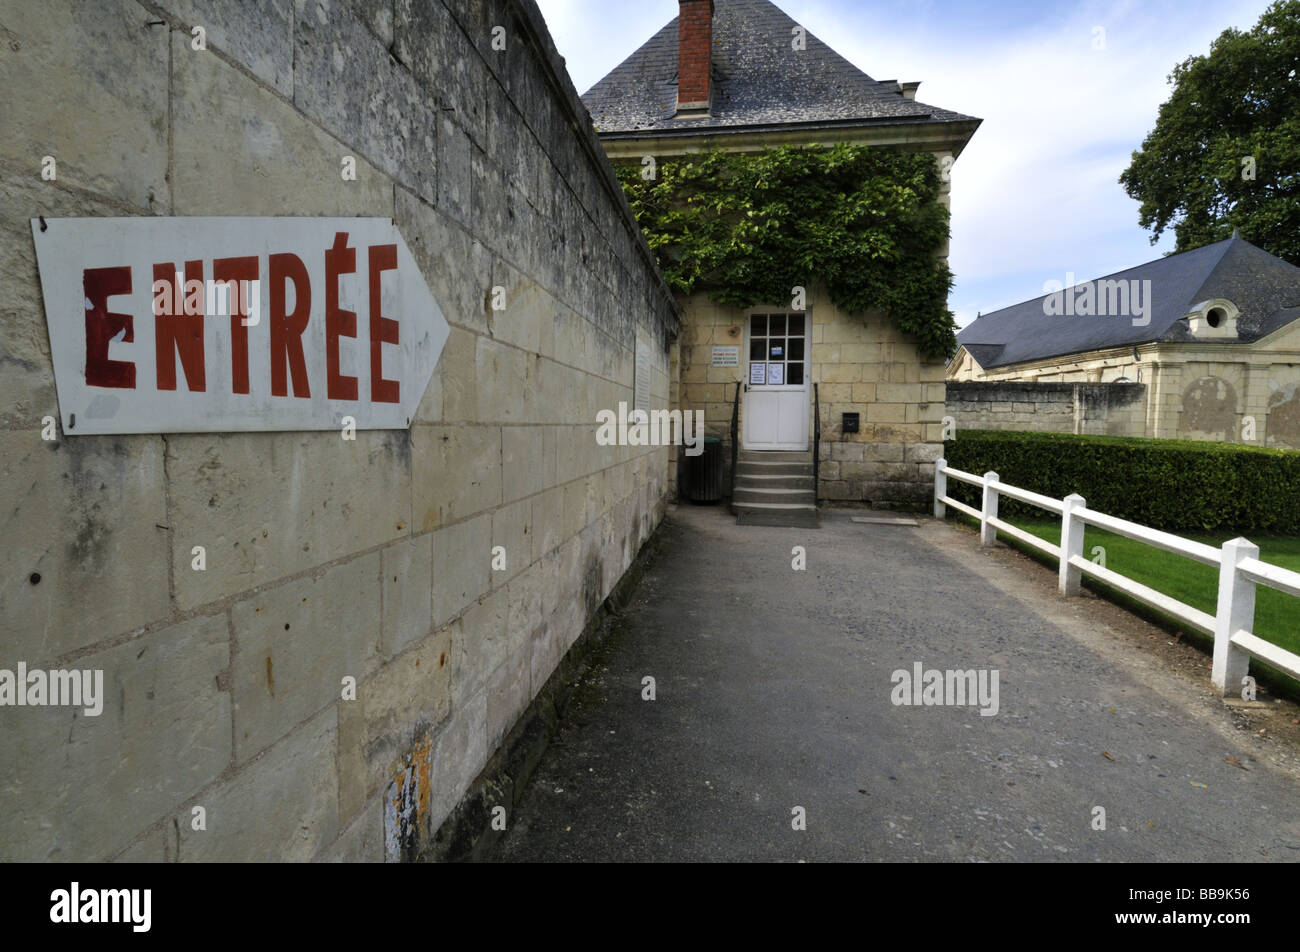 Entrance to Usse castle, Rigny-Usse, France. Stock Photo